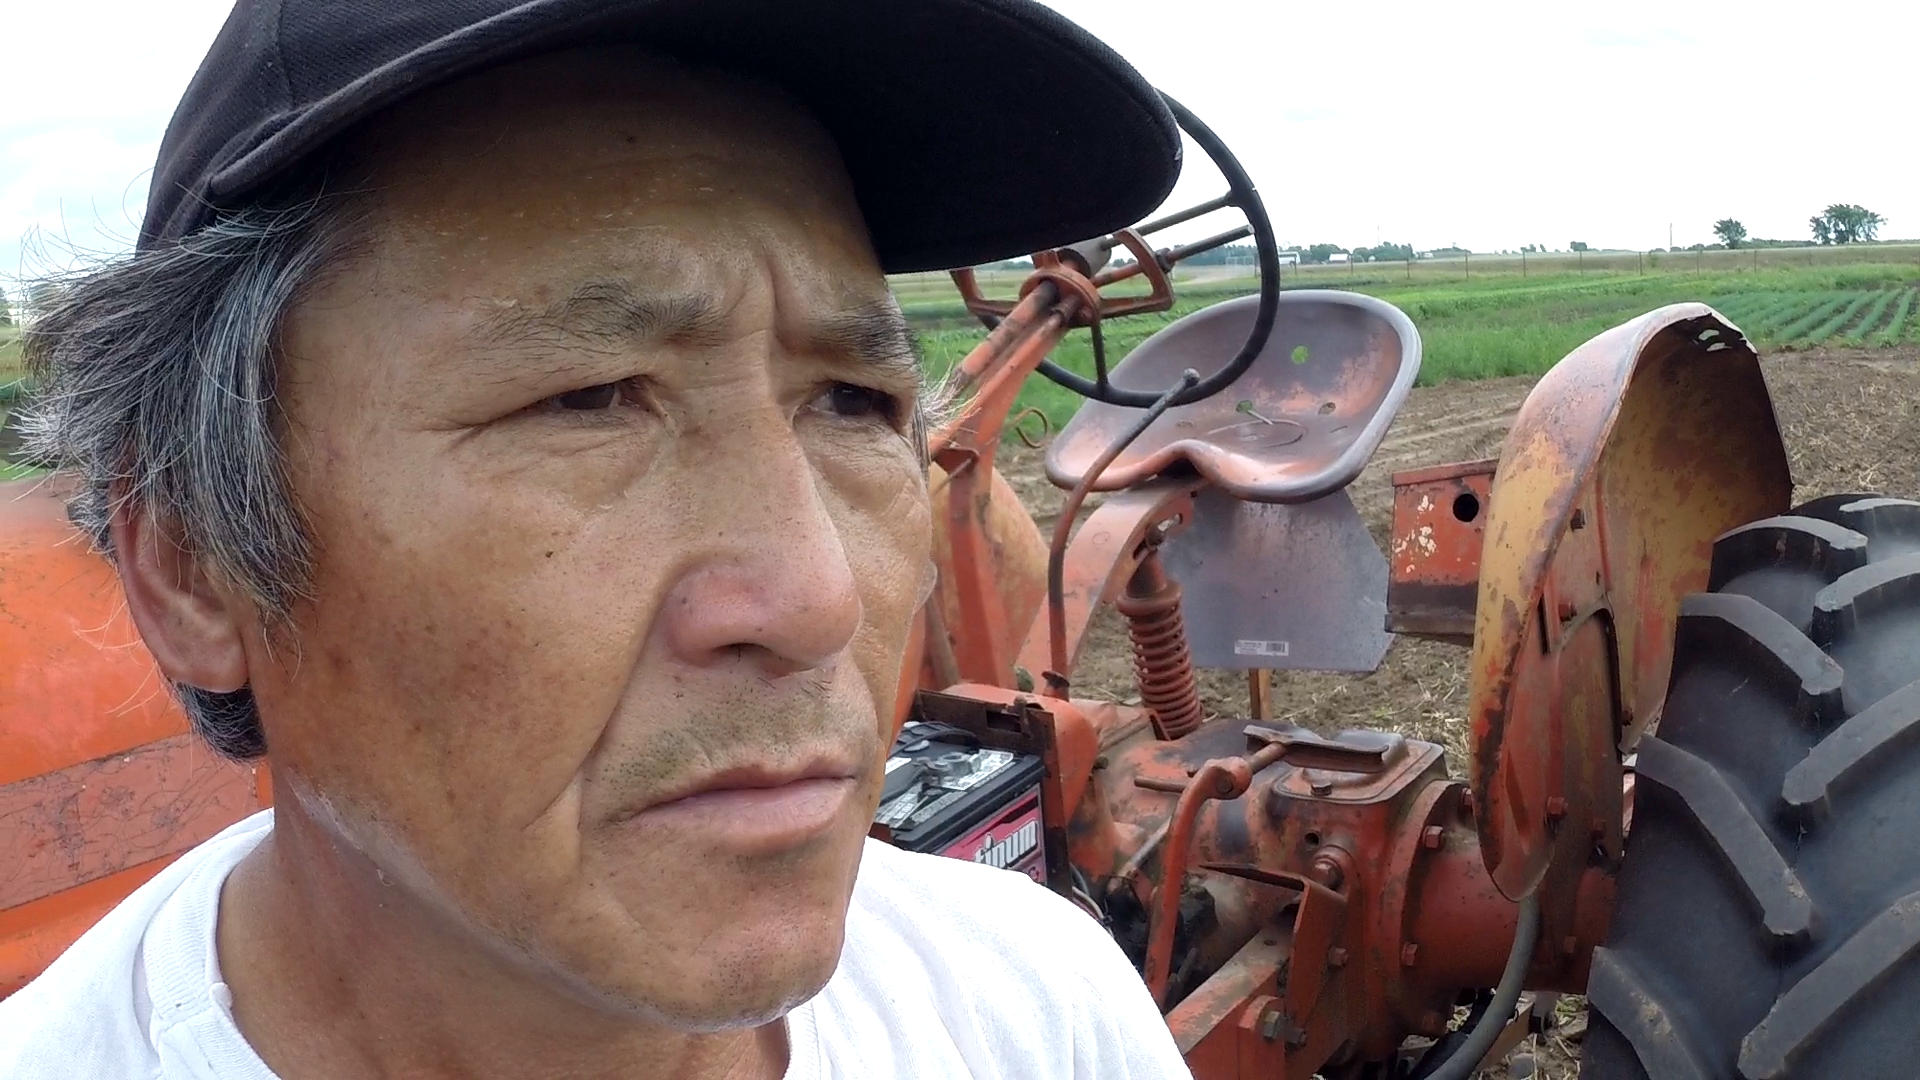 A stern-looking middle-aged Asian man standing next to farm equipment.